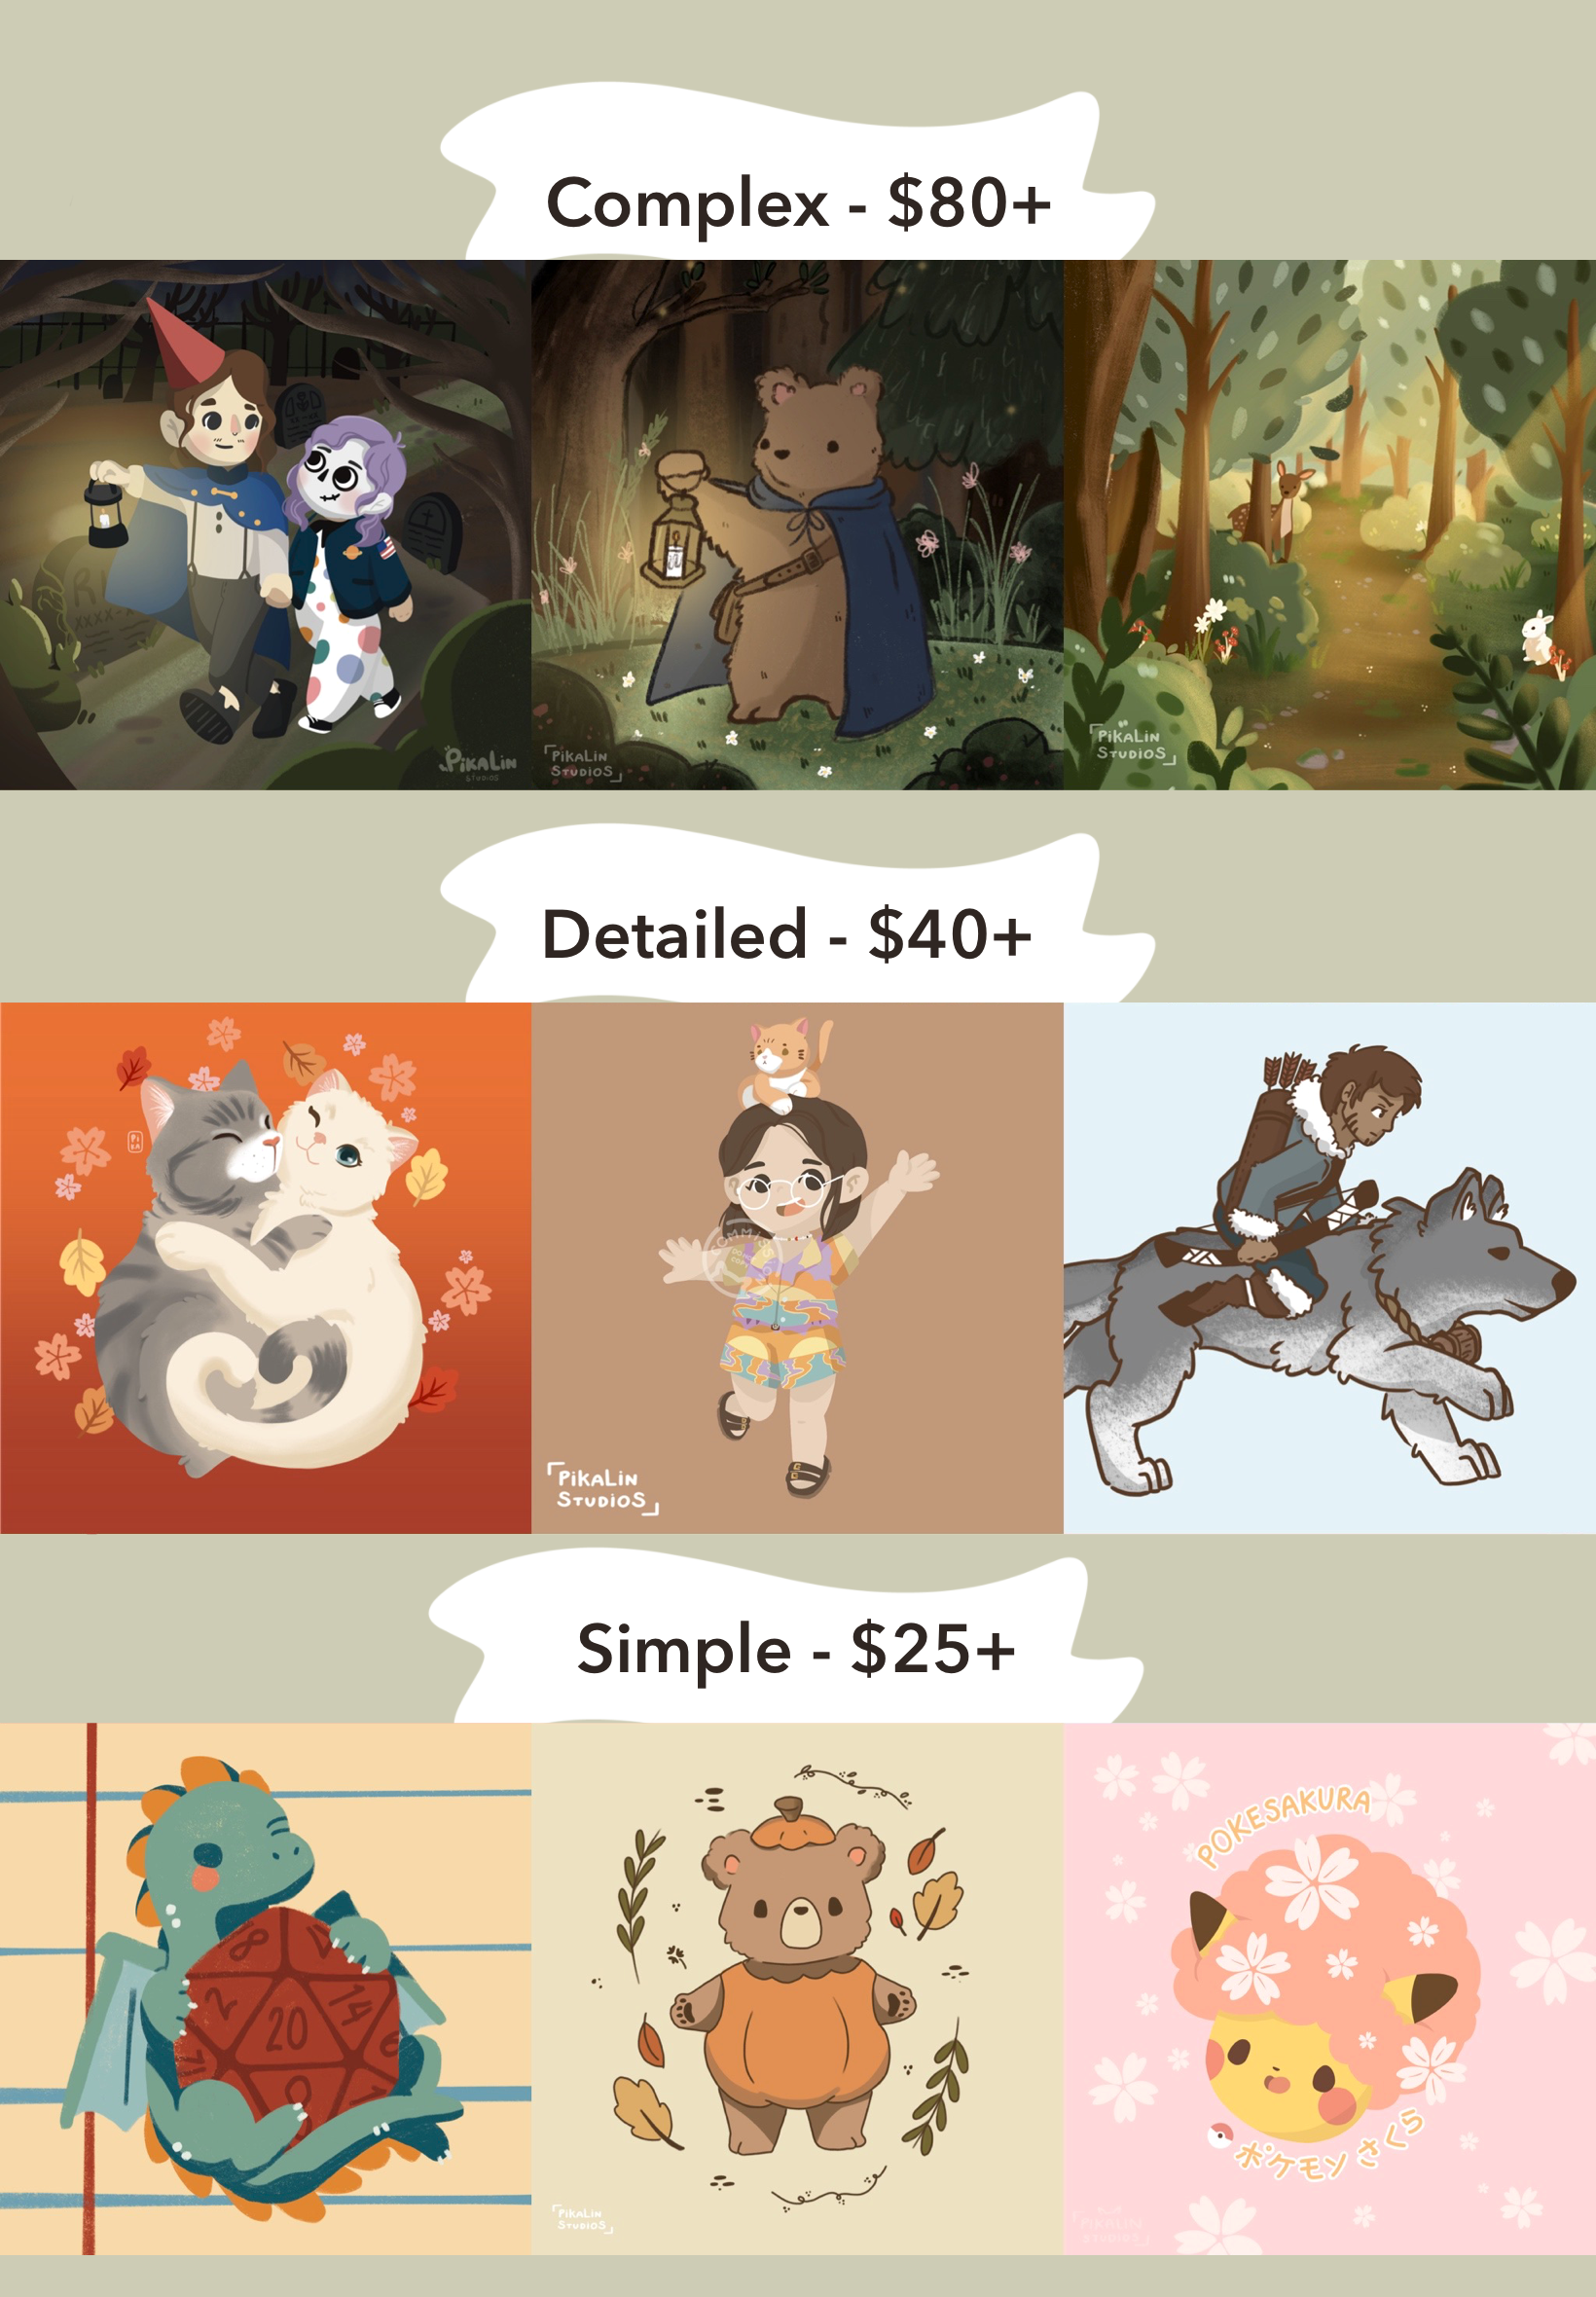 This image shows the different examples of commissions at each tier